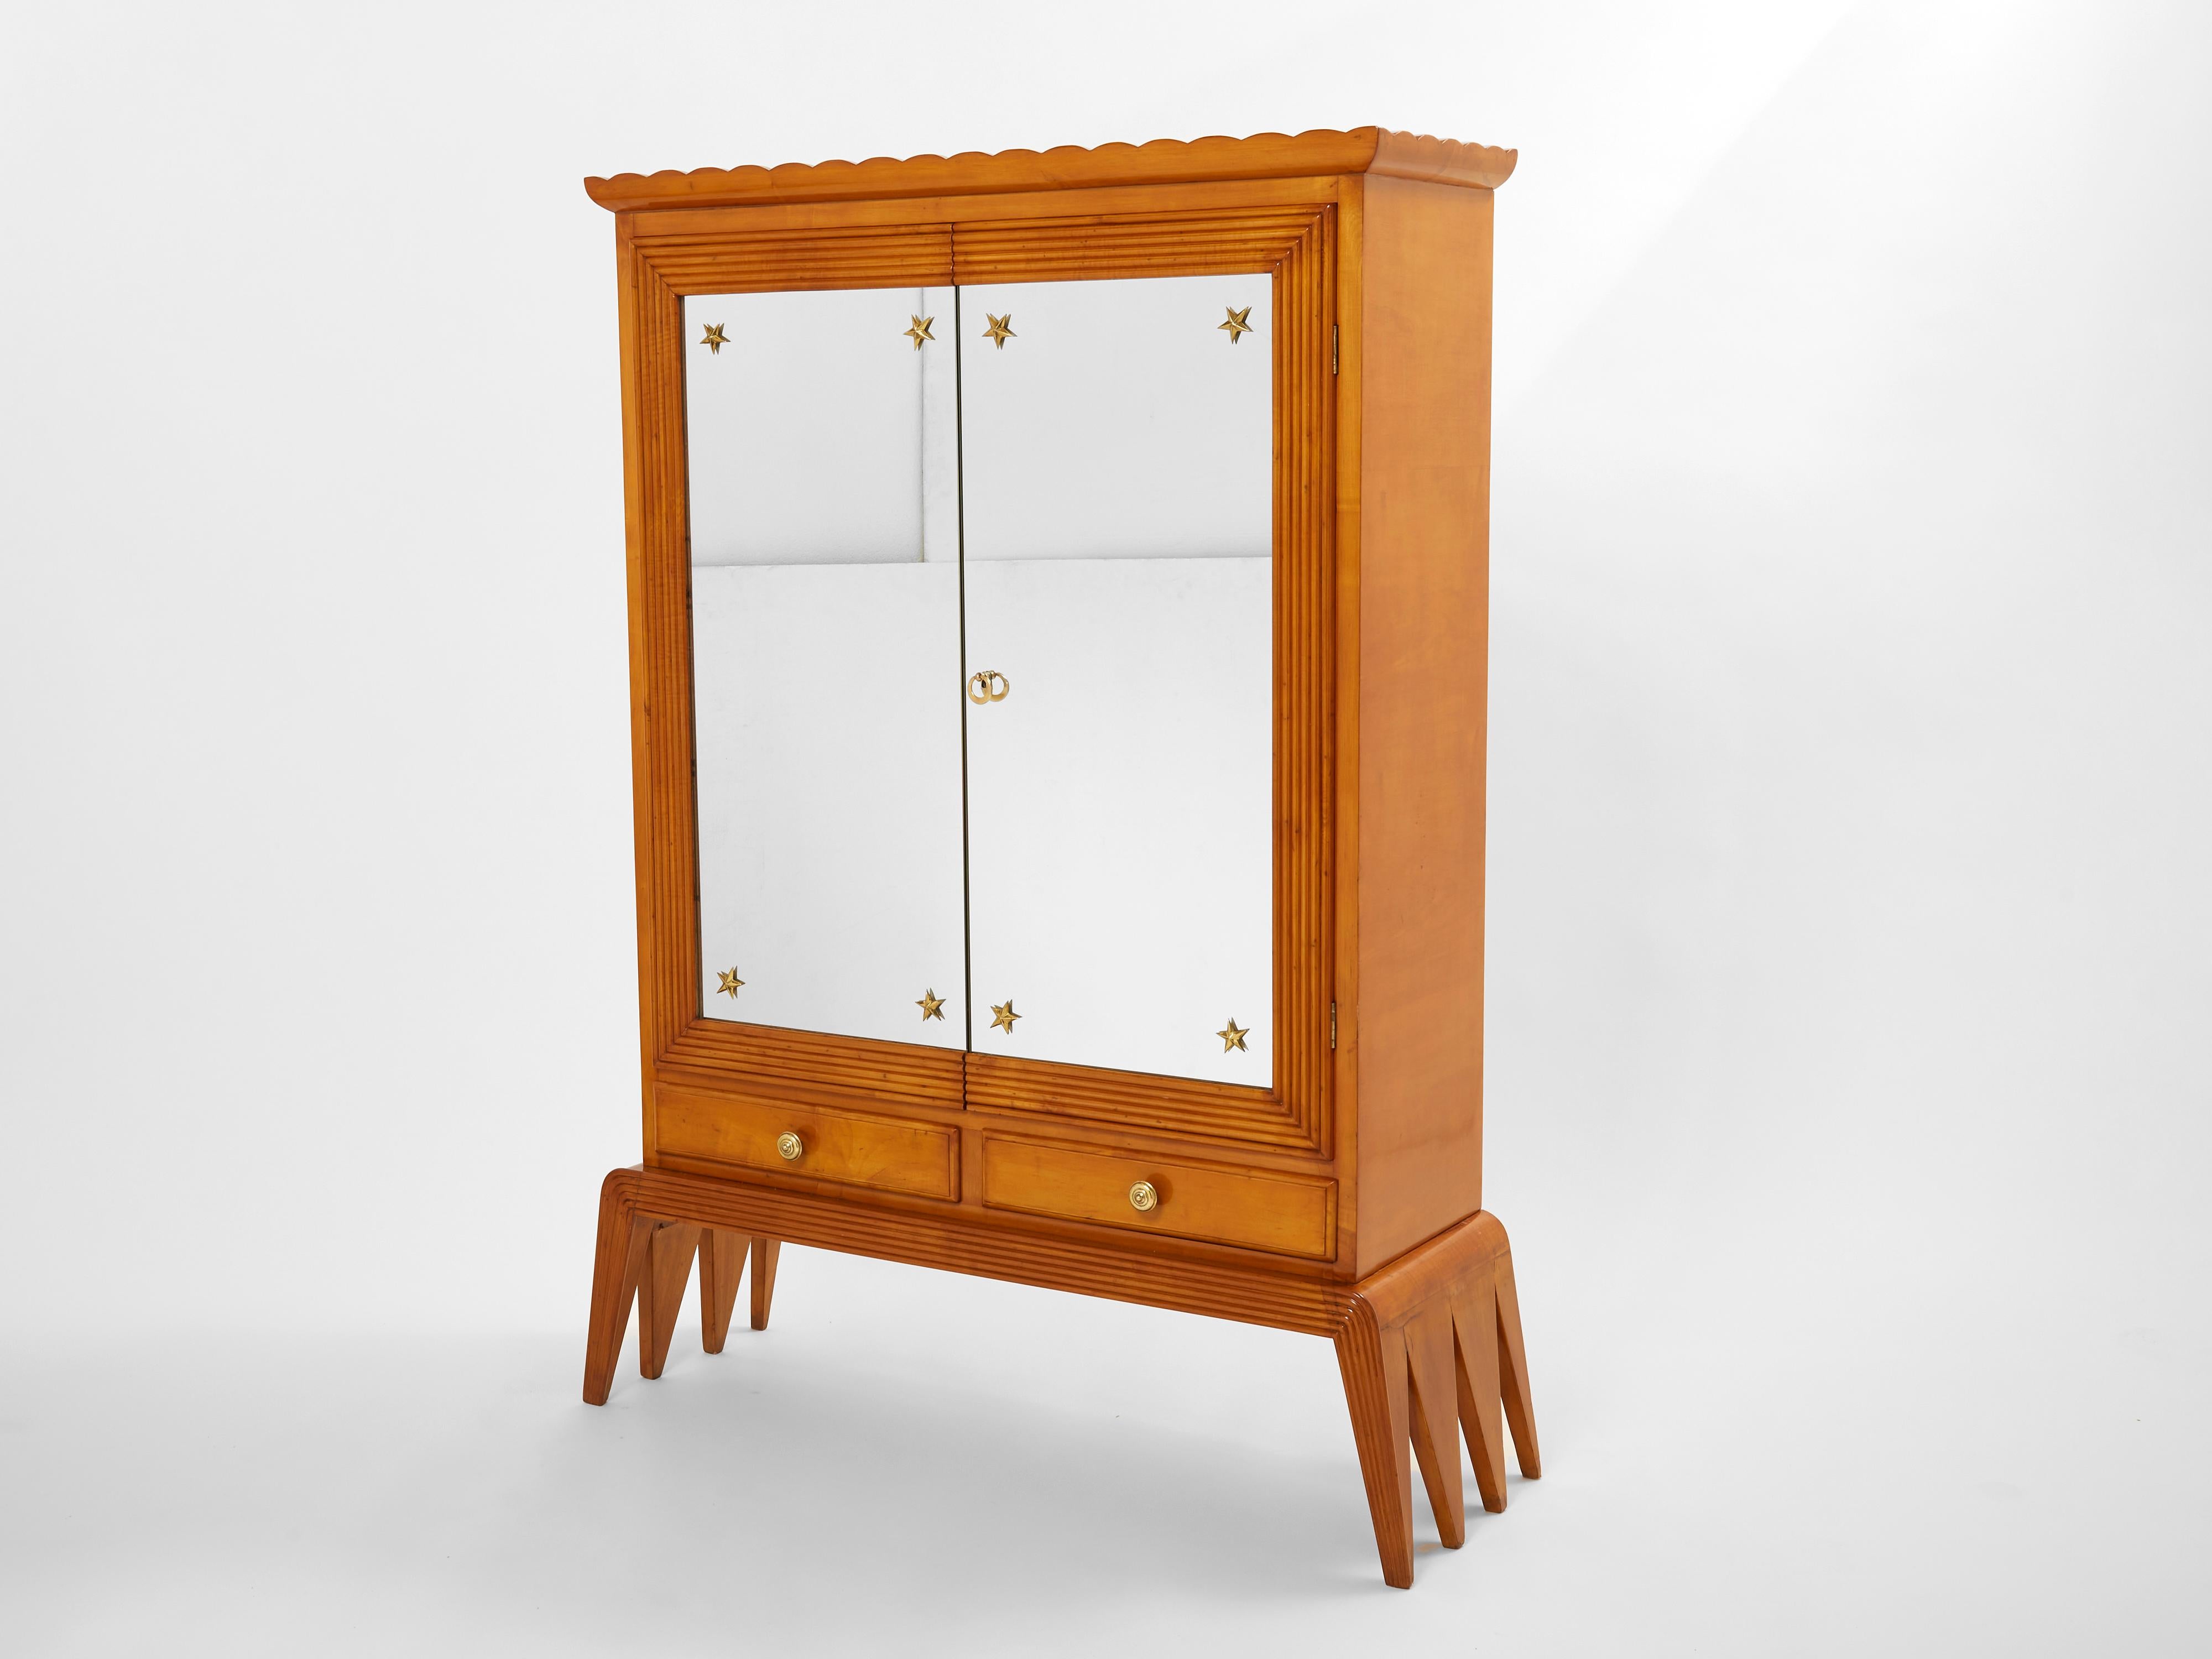 A rare Osvaldo Borsani bar cabinet (mobile bar) produced by Arredamenti Borsani Varedo in Milano in the mid-1940s. It features a body in cherry wood with incised relief lines framing two mirrored doors with brass stars in the corners of each, two